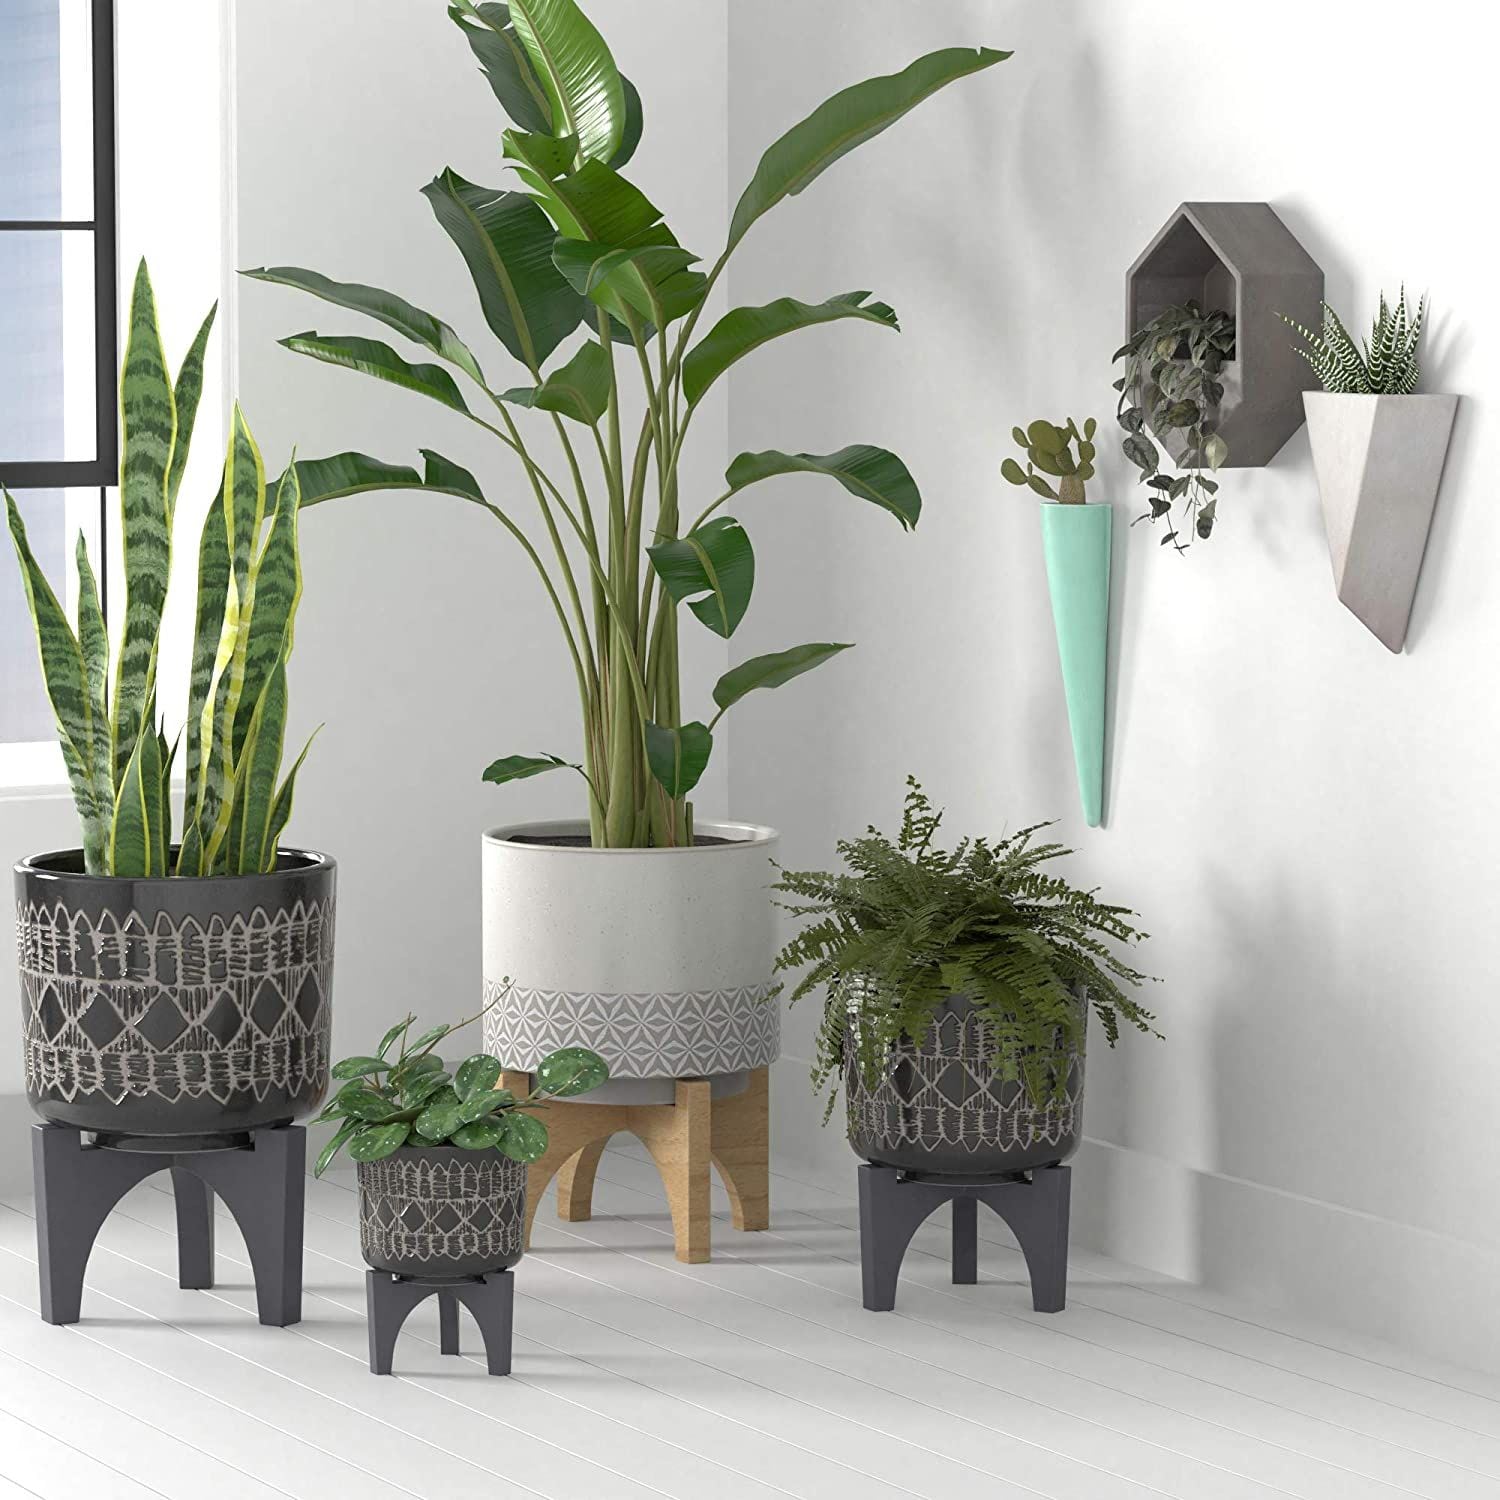 Global Stoneware Planter with Black Wood Stand, as featured in Amazon's 2021 Big Winter Sale.